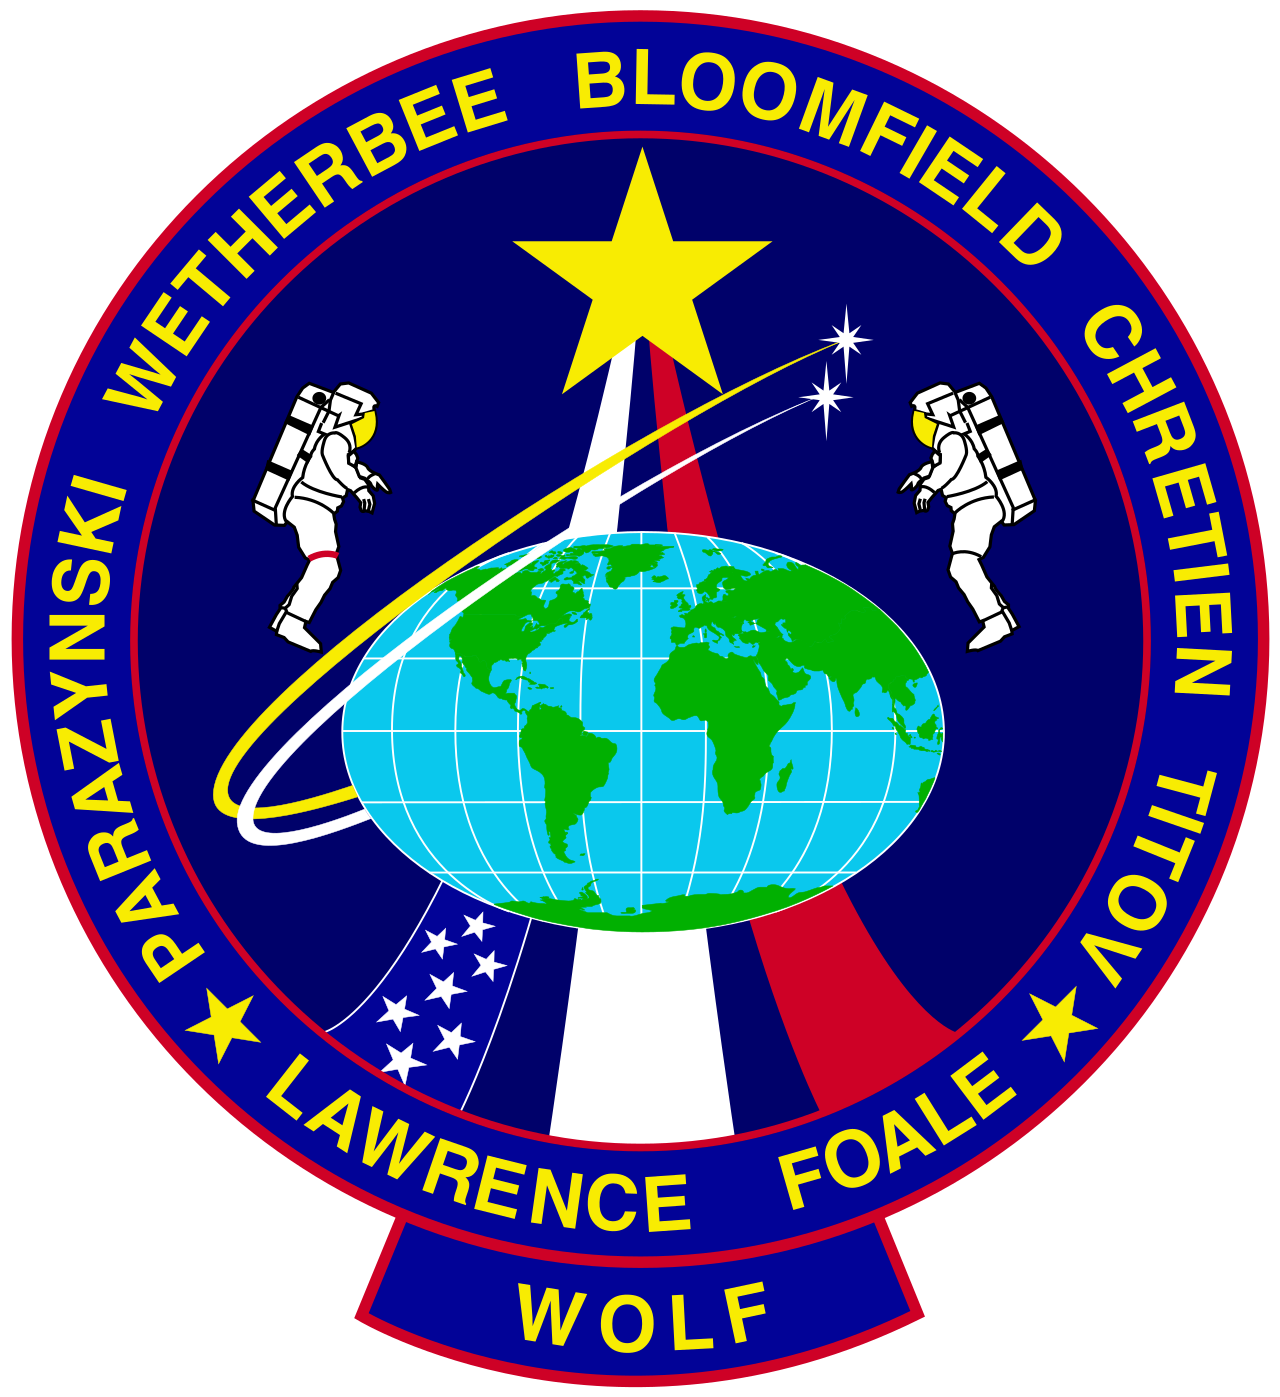 Mission patch for STS-86